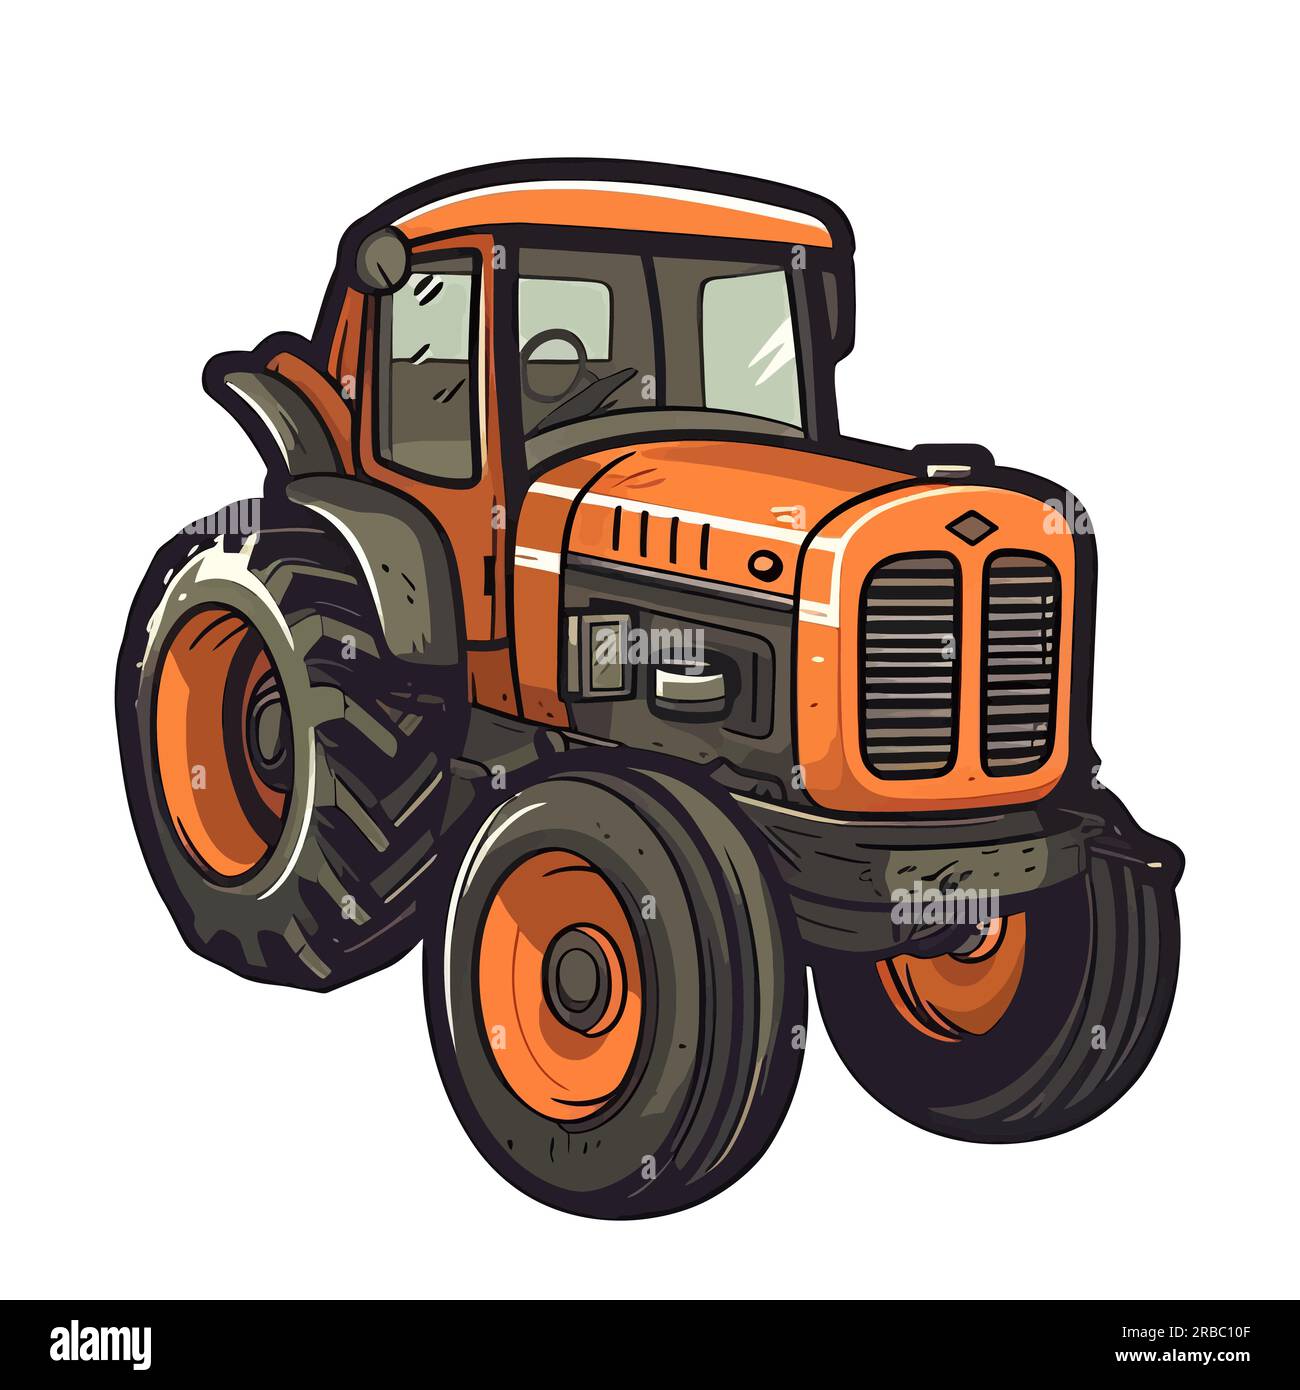 Tractor logo. Farmer tractor image in flat style. Tractor image ...